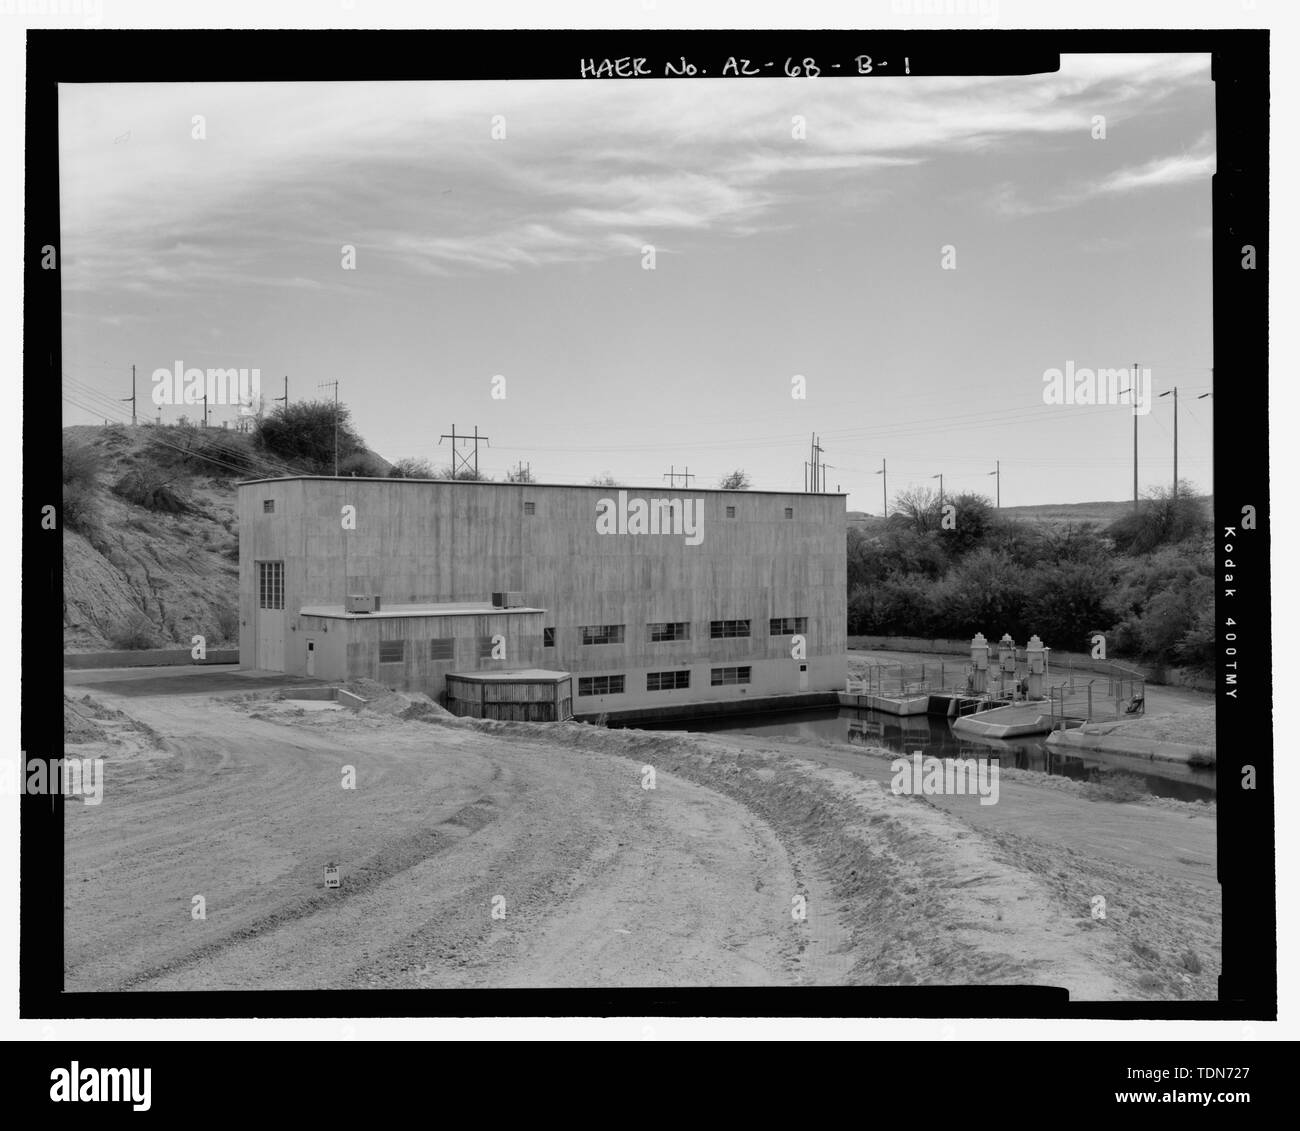 Perspective view, showing west front and north side, with ca. 1974-1975 outdoor regulatory pumps at right, and hydraulic gate check cylinders on the afterbay structure on the crest of the hill in left background - Wellton-Mohawk Irrigation System, Pumping Plant No. 2, Bounded by Interstate 8 to south, Wellton, Yuma County, AZ Stock Photo